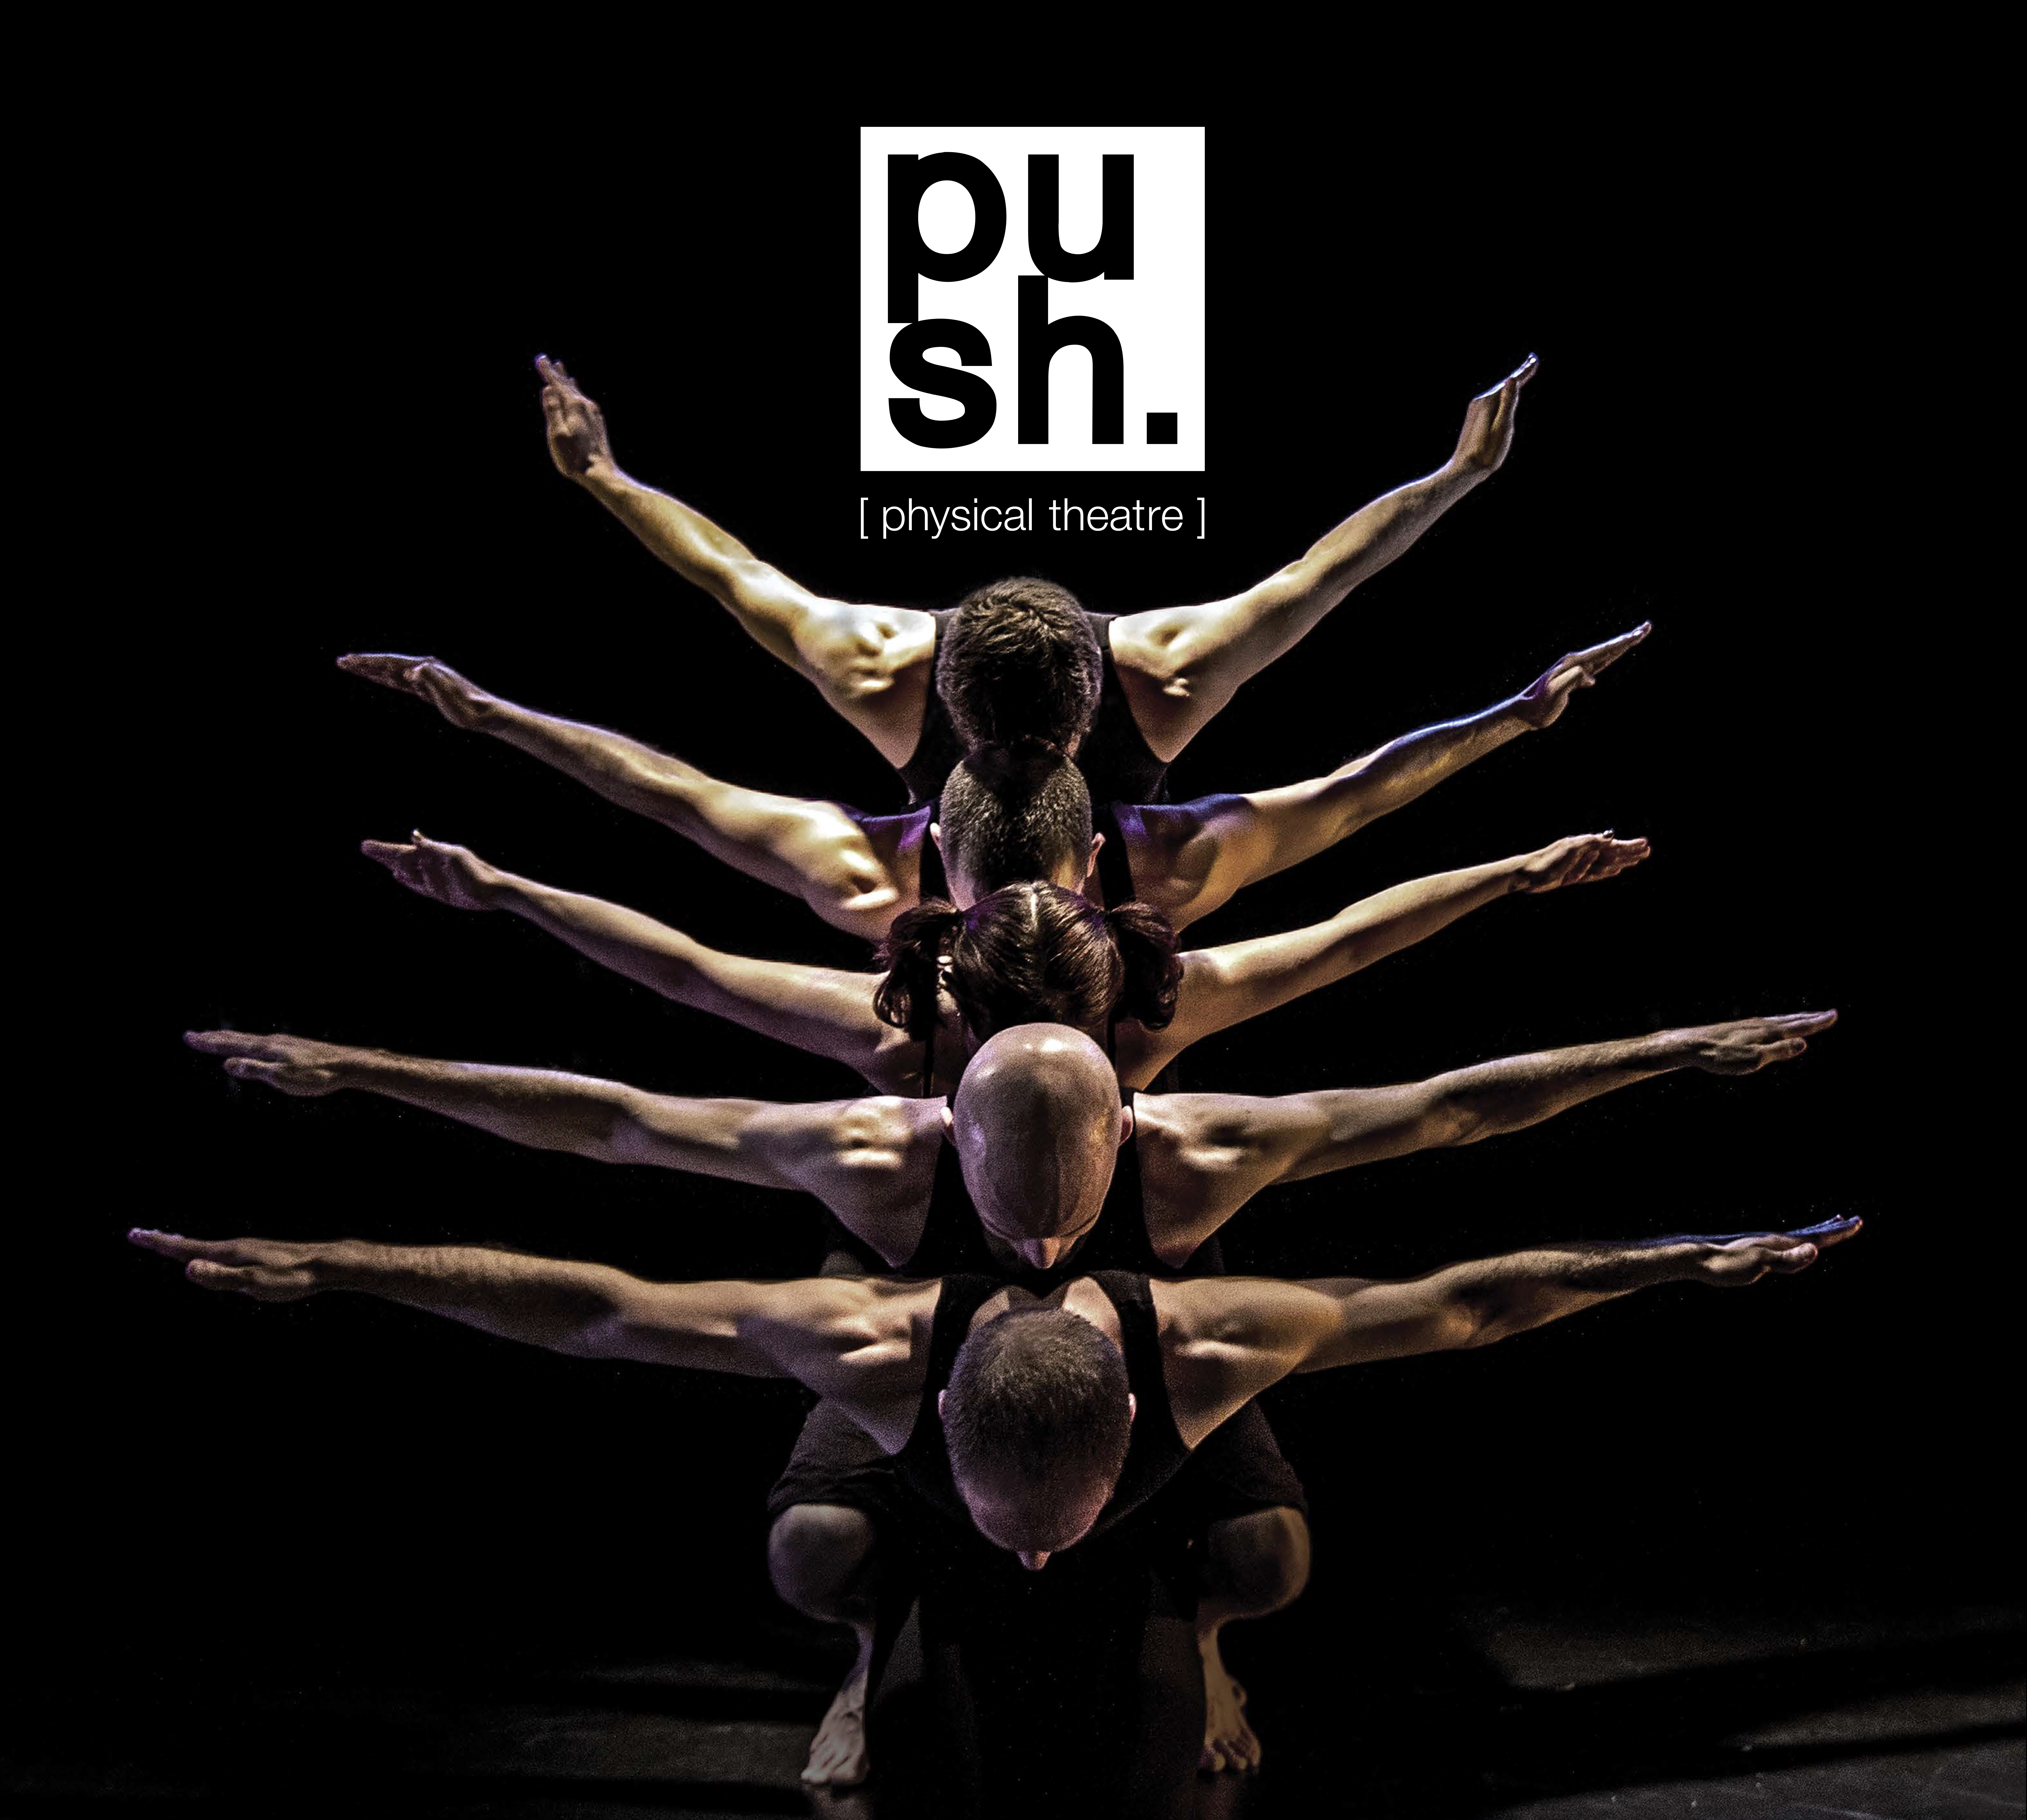 Push Physical Theater